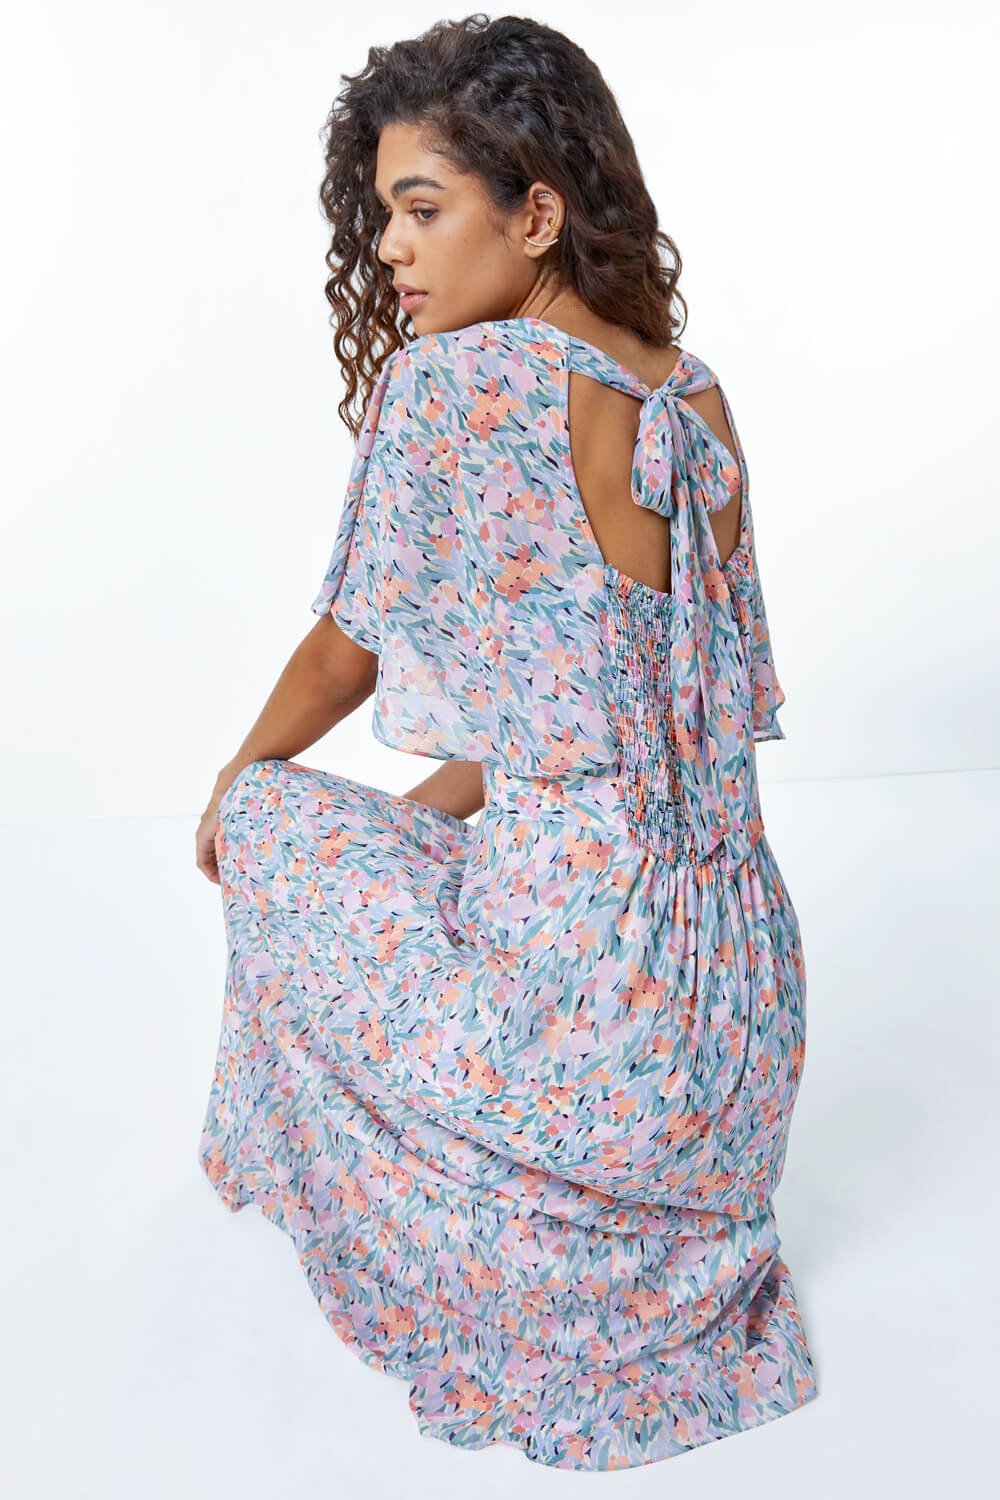 Lilac Floral Print Angel Sleeve Maxi Dress, Image 1 of 5